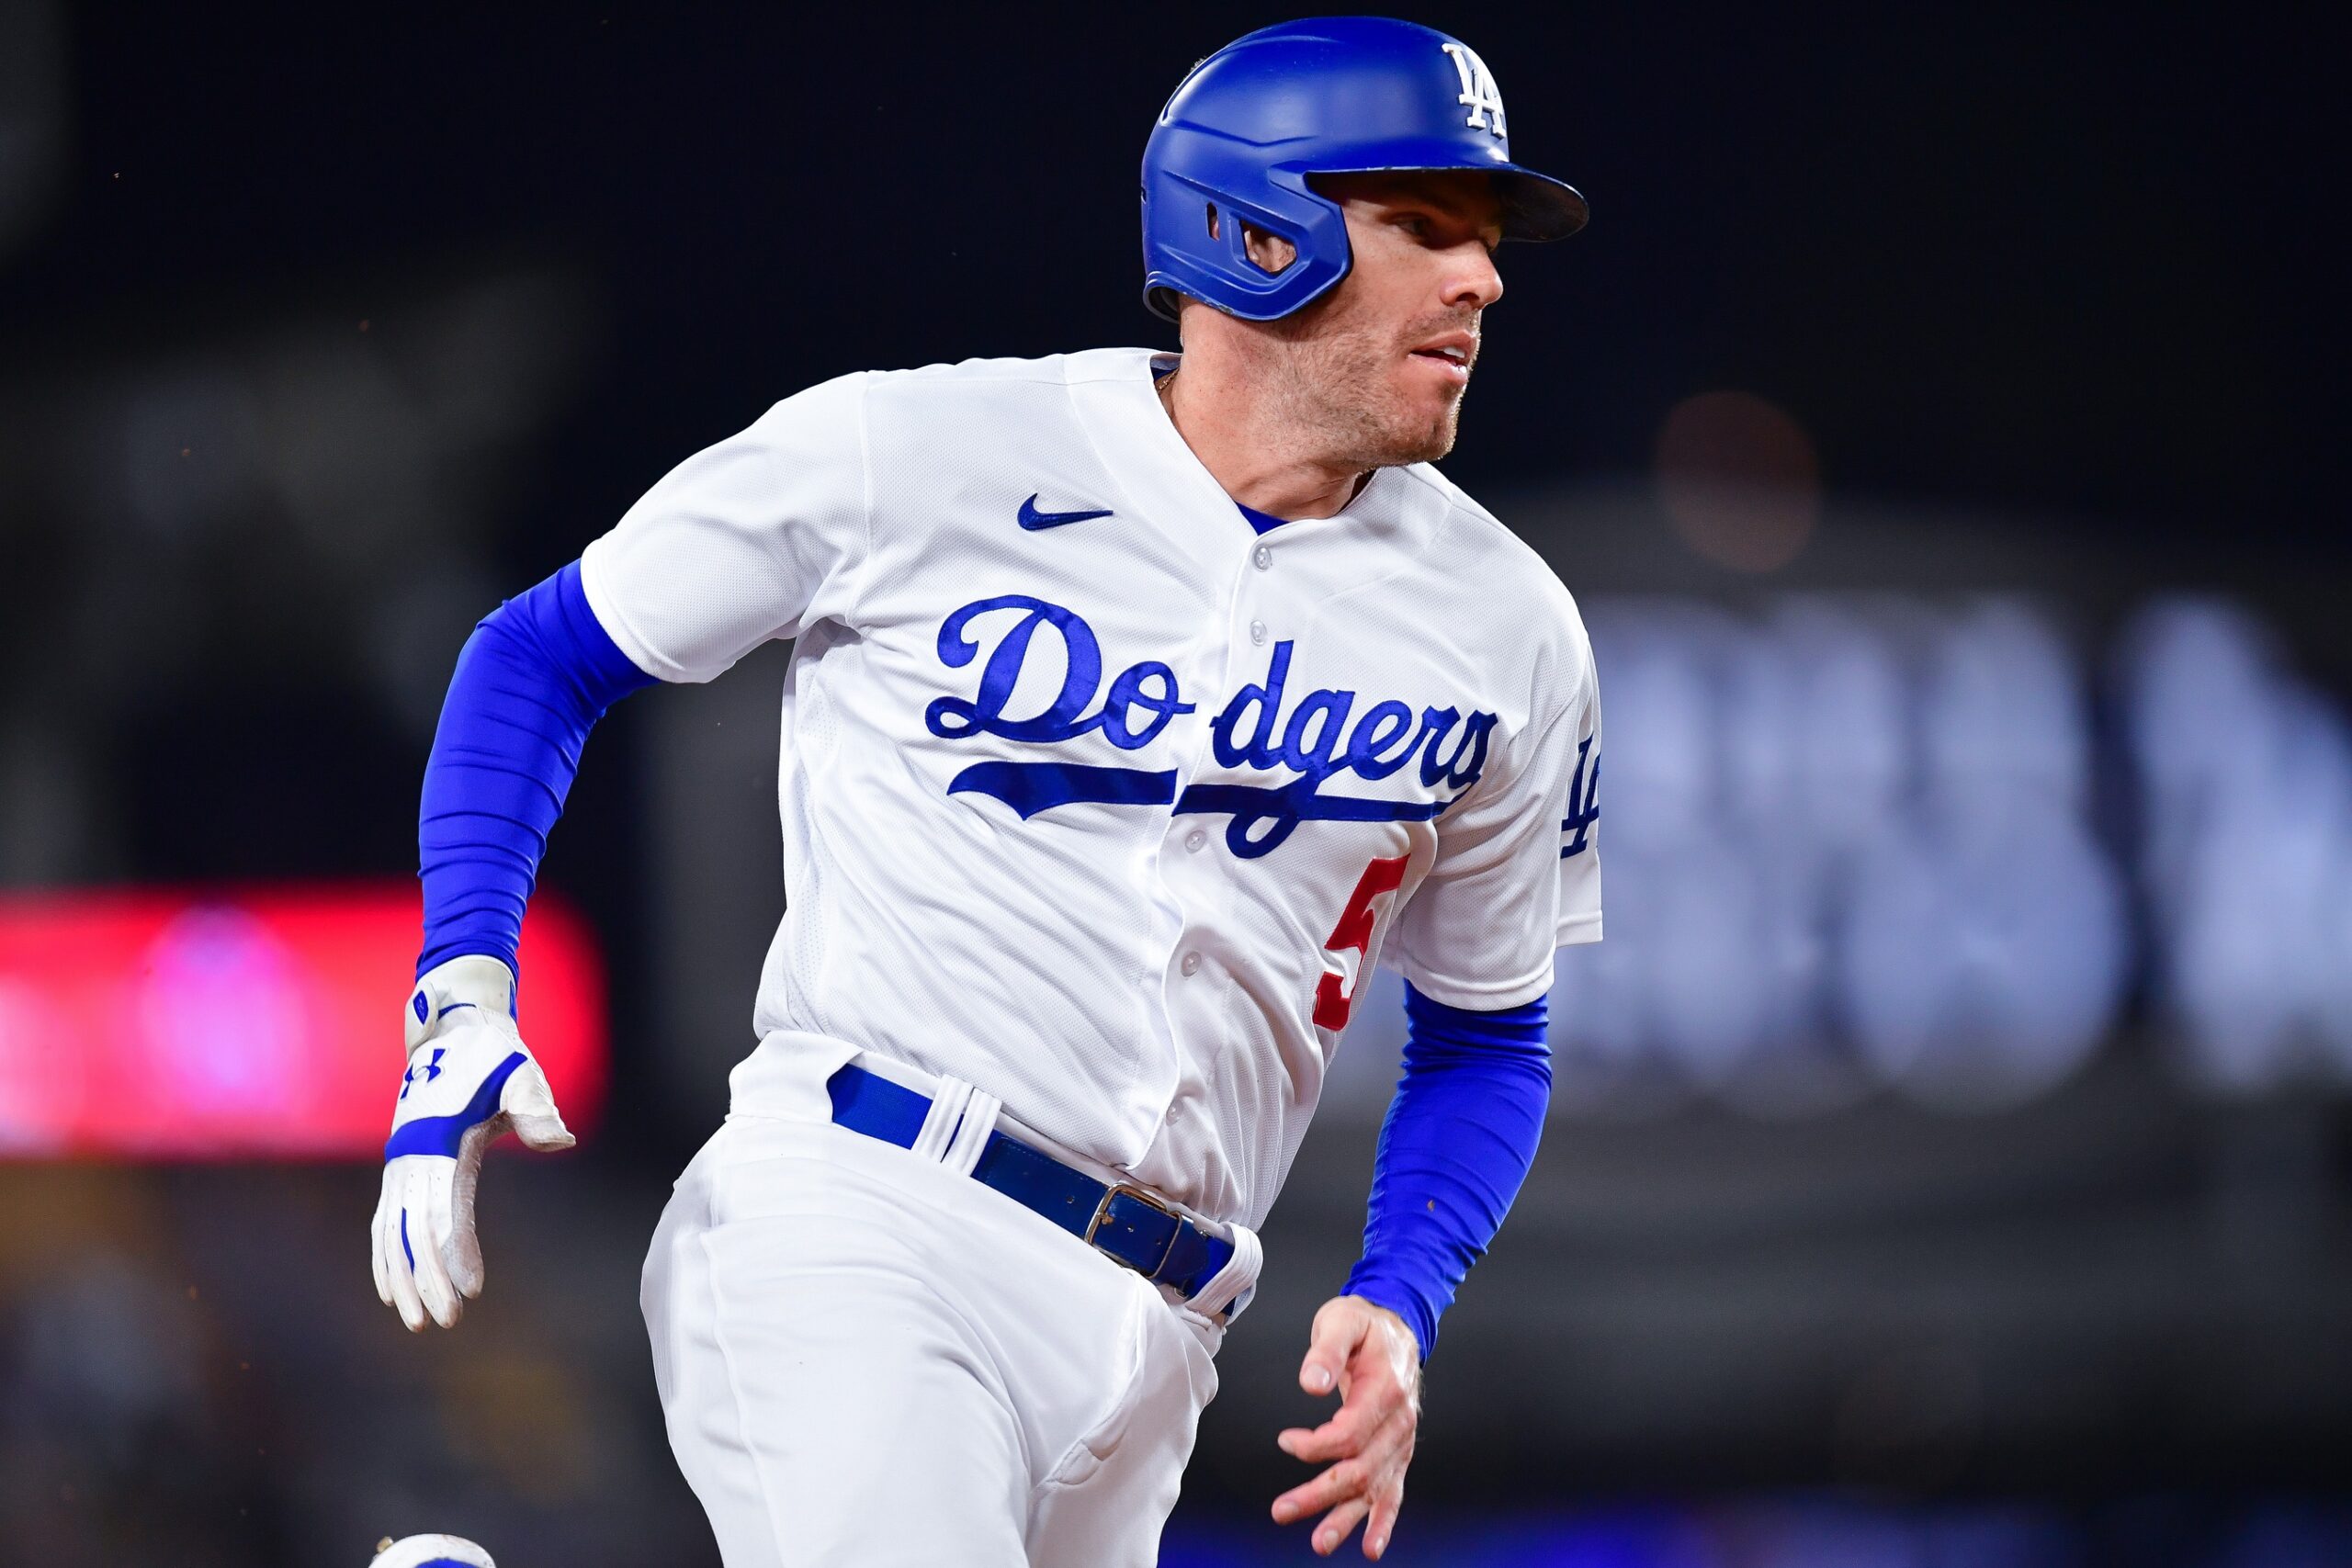 Dodgers news: Dave Roberts on Freddie Freeman possibly signing with LA